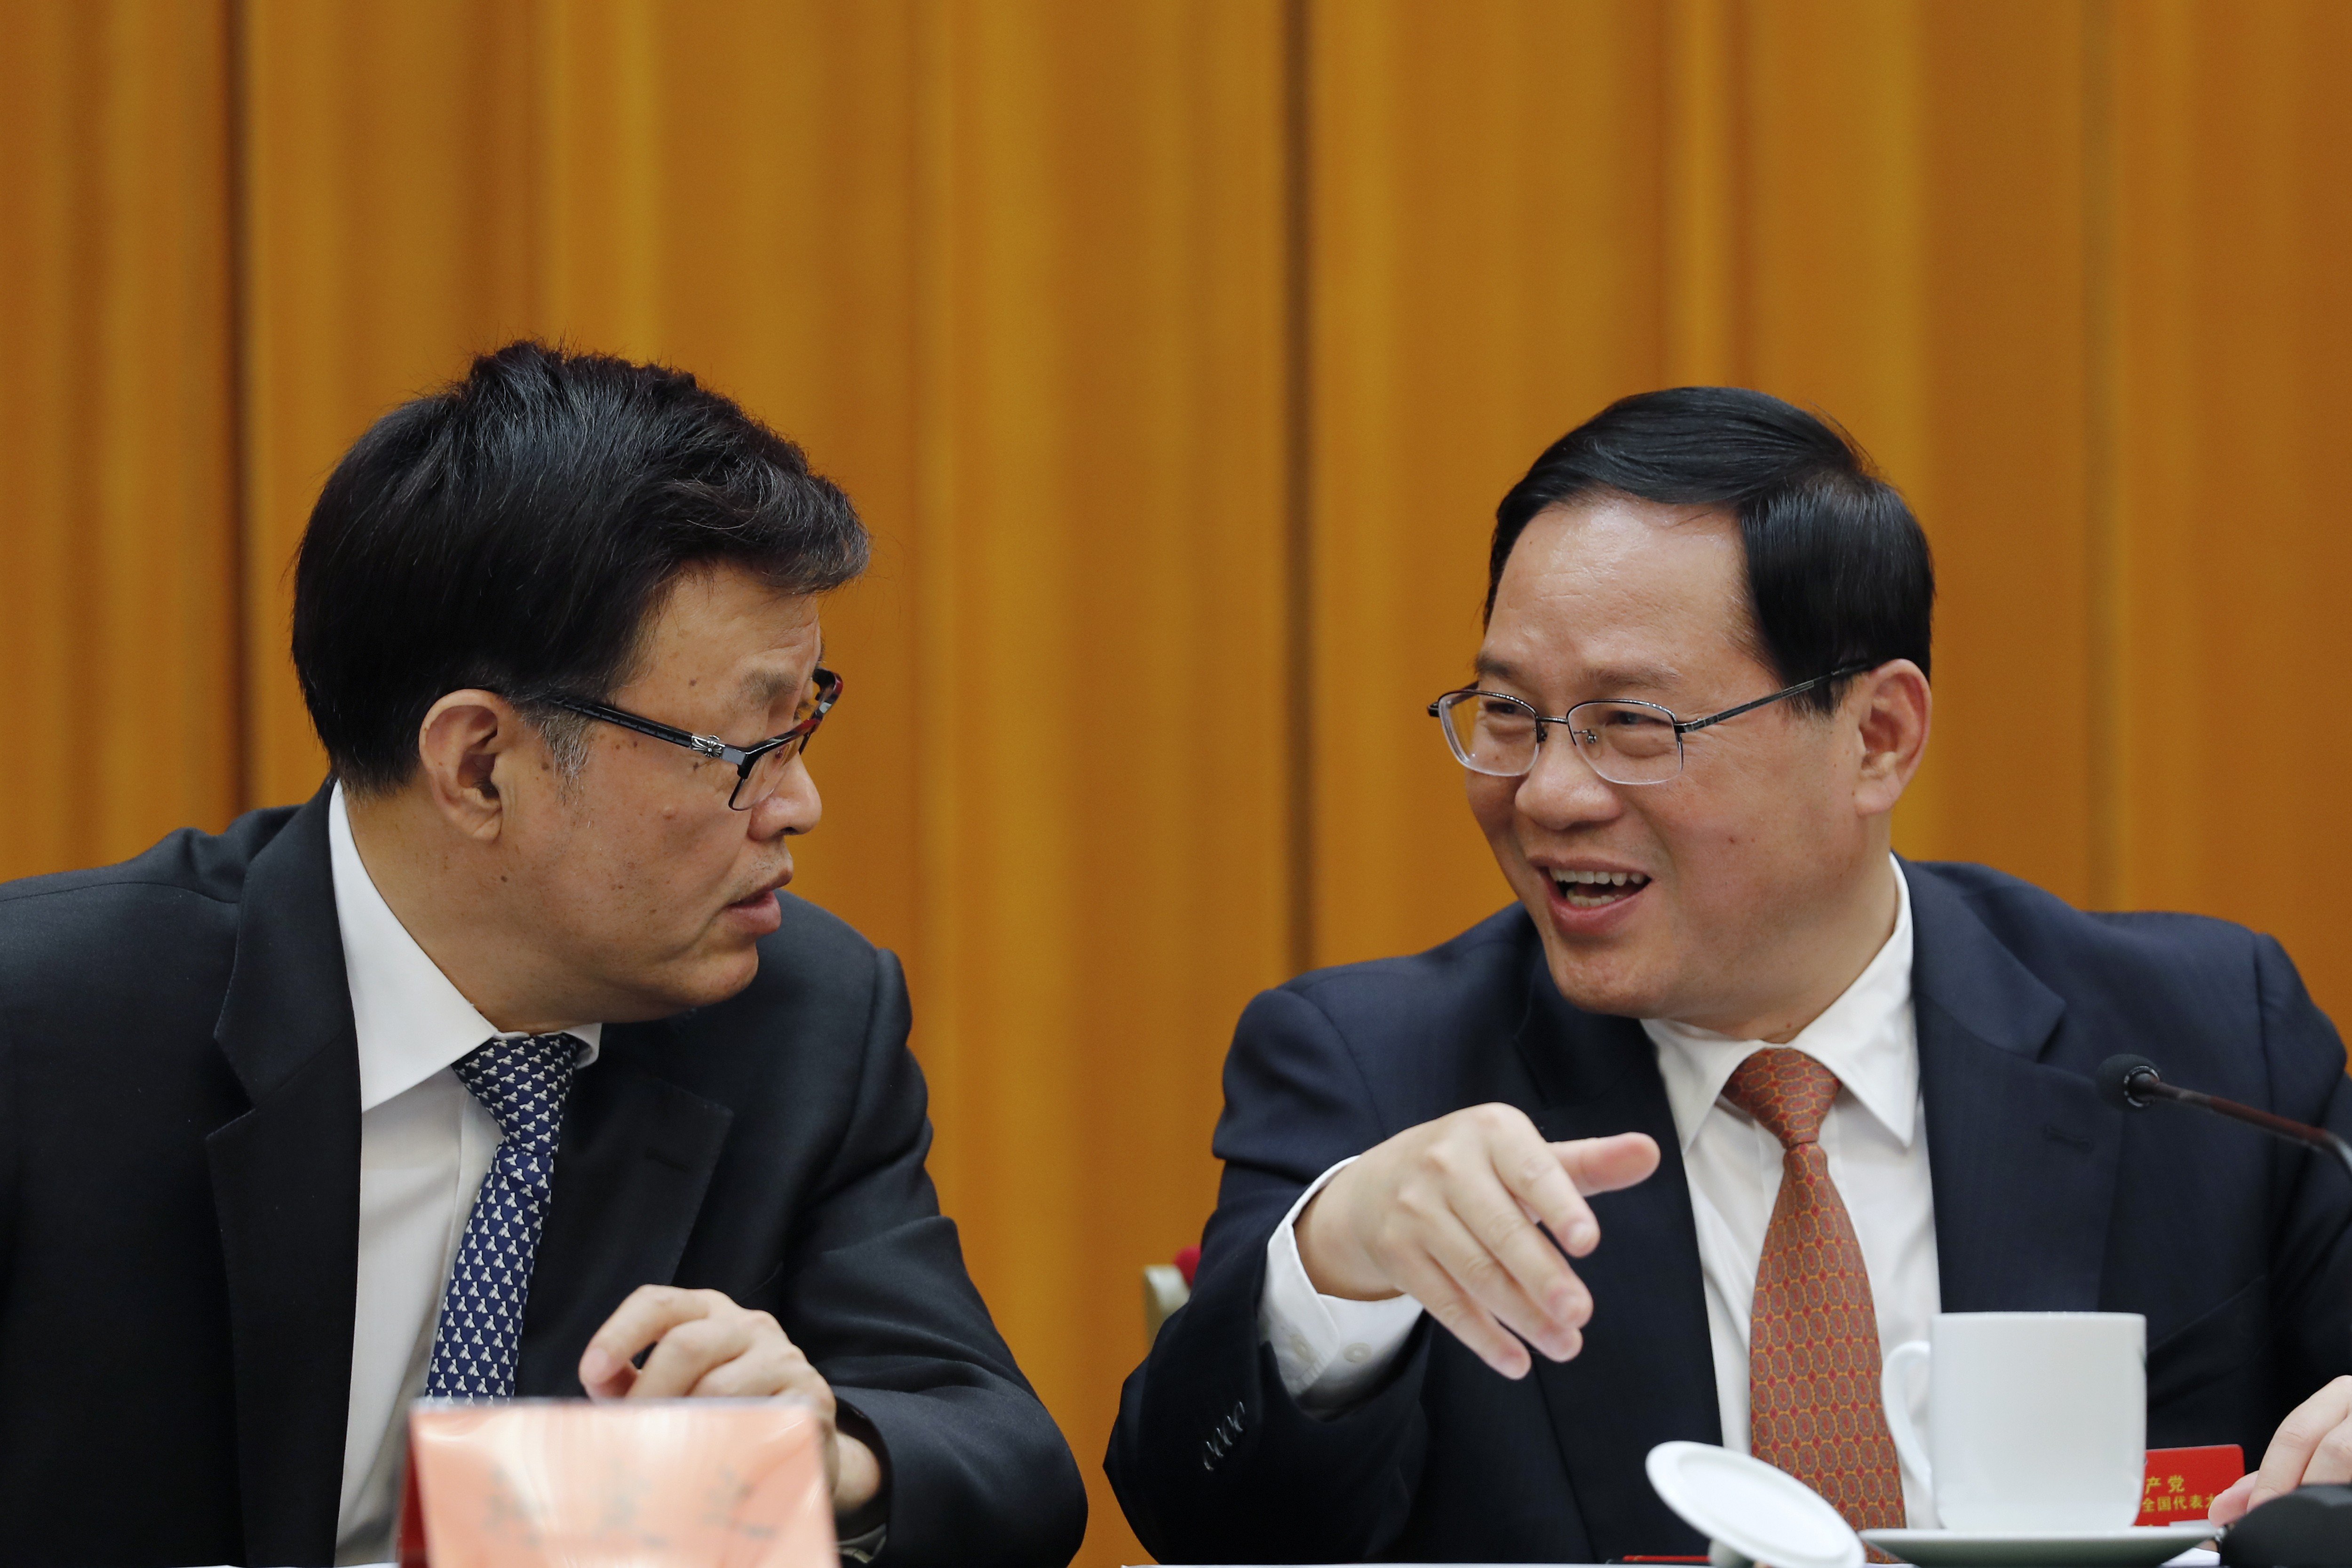 Li Qiang has been outspoken in his support for economic reform, innovation and the private sector. Photo: AP